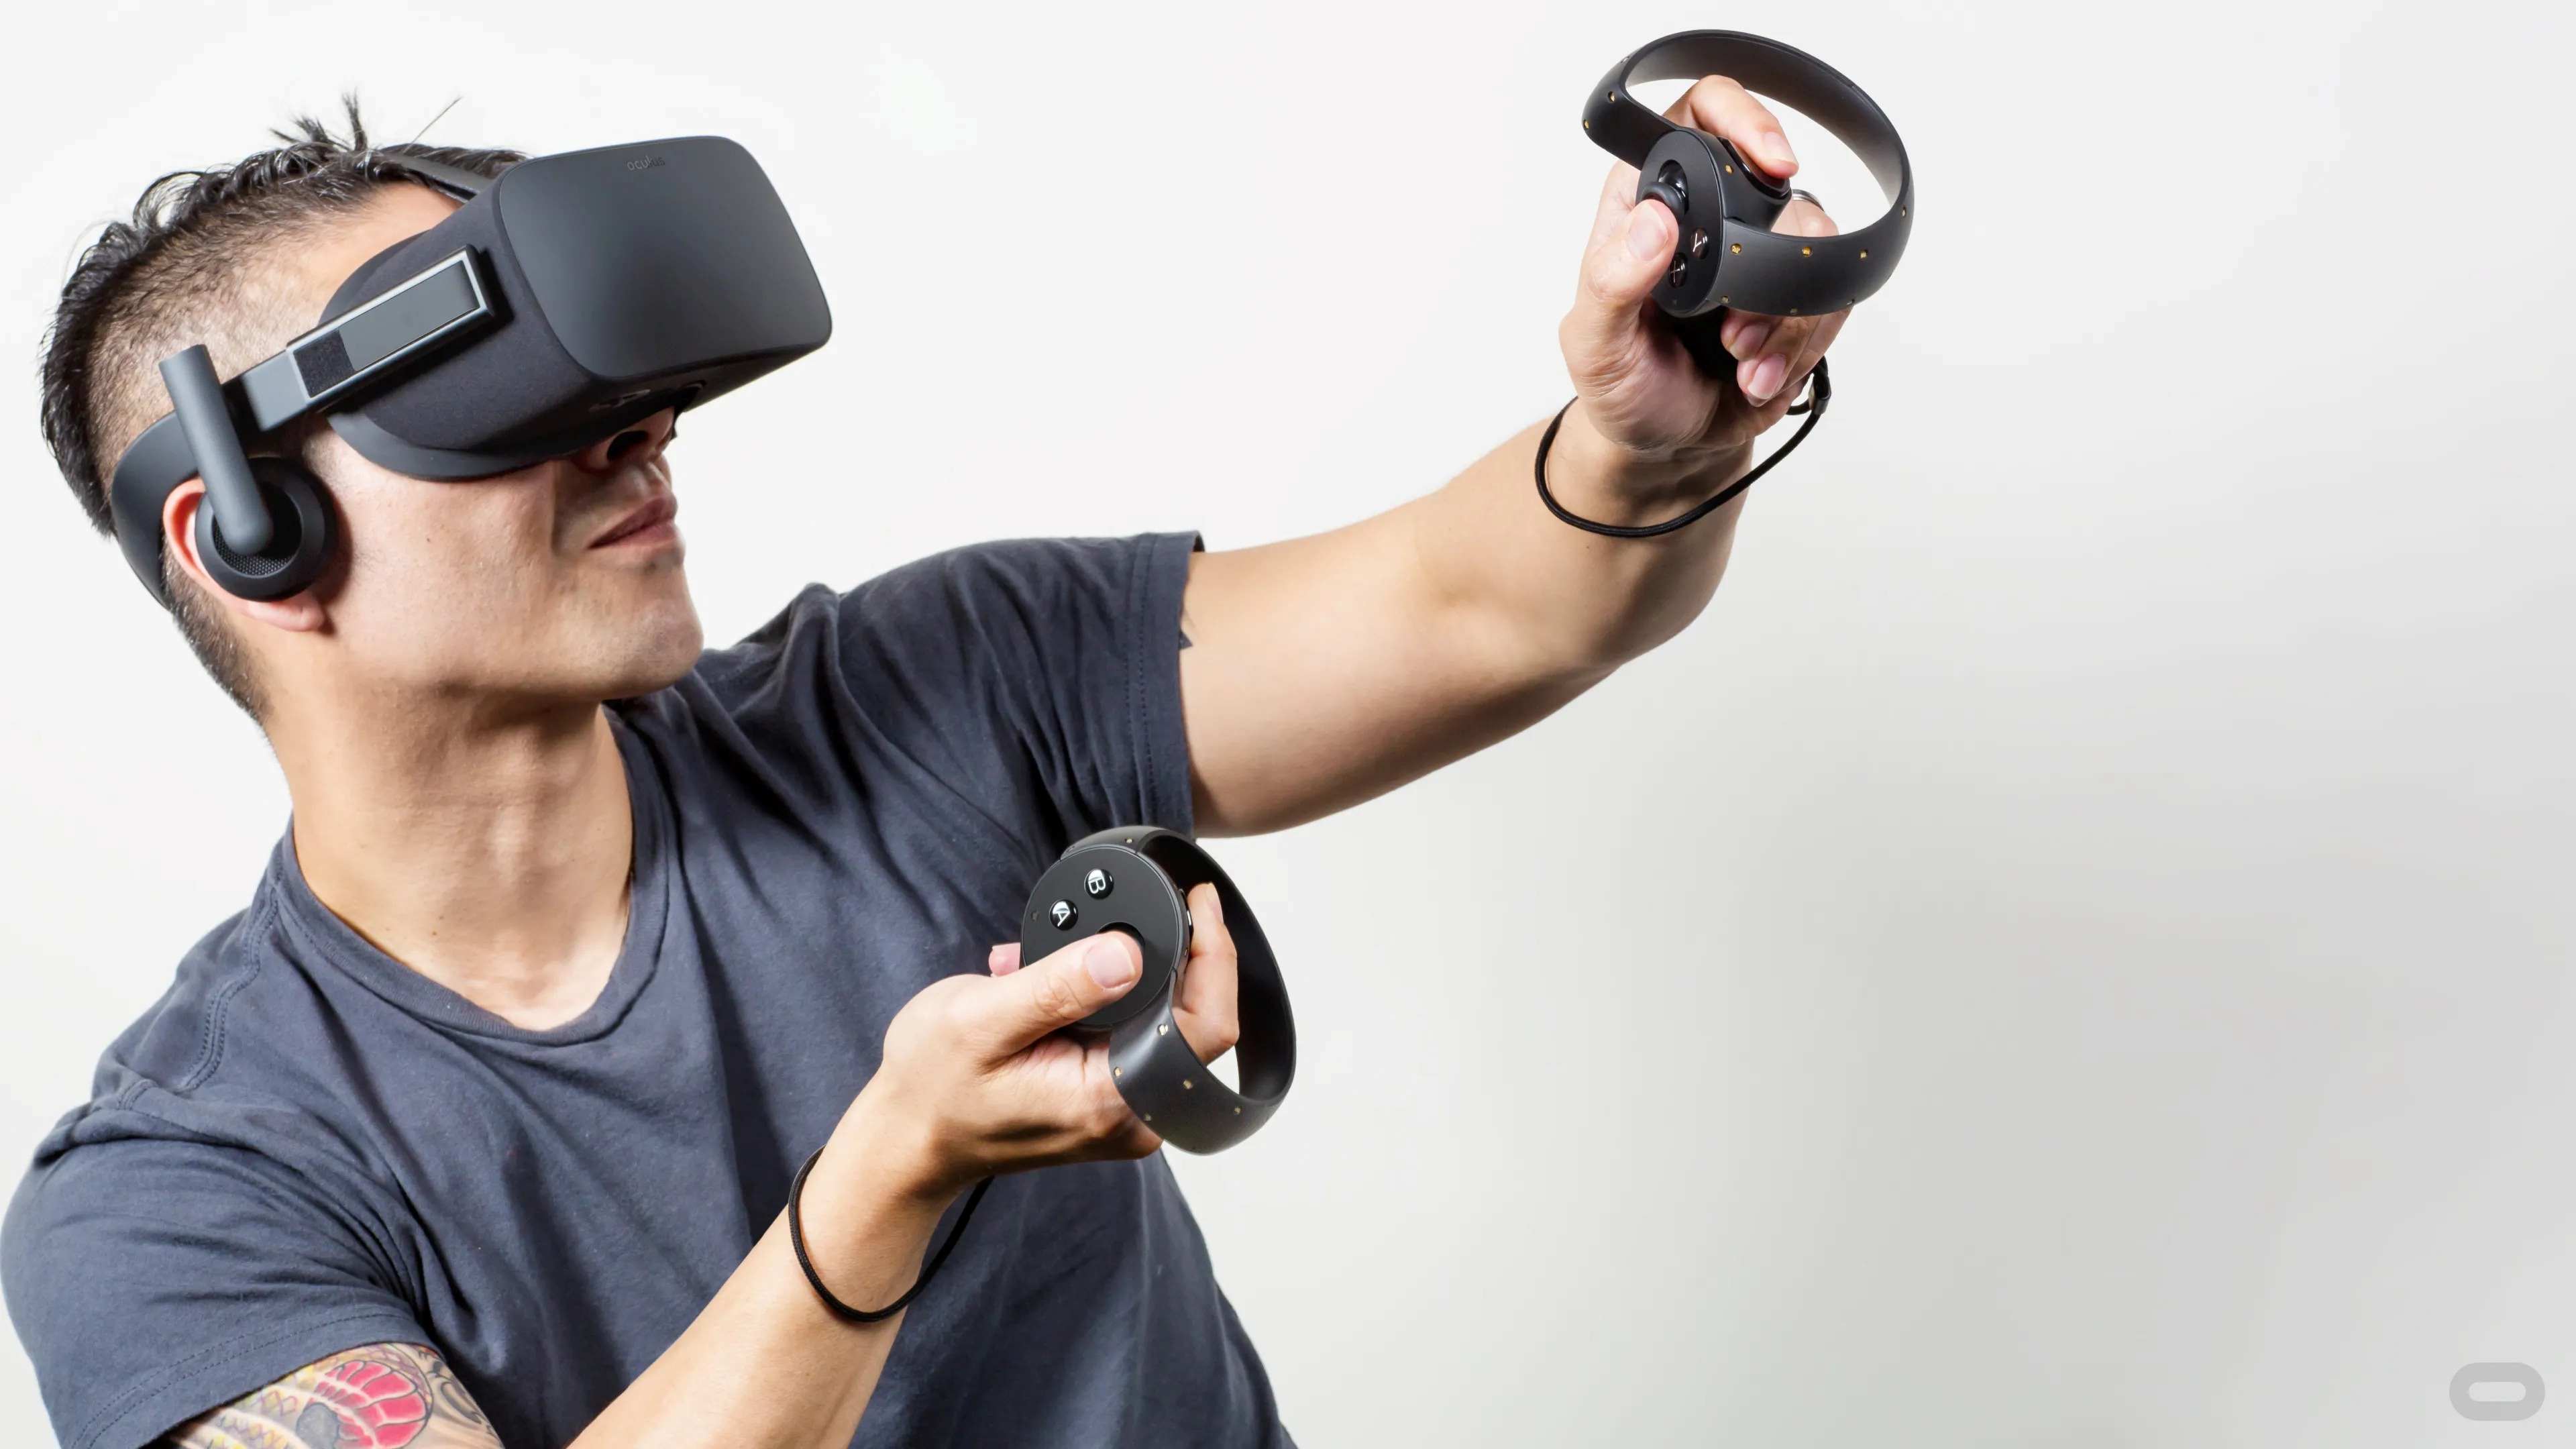 How Do You Make Your Character Move With Oculus Rift